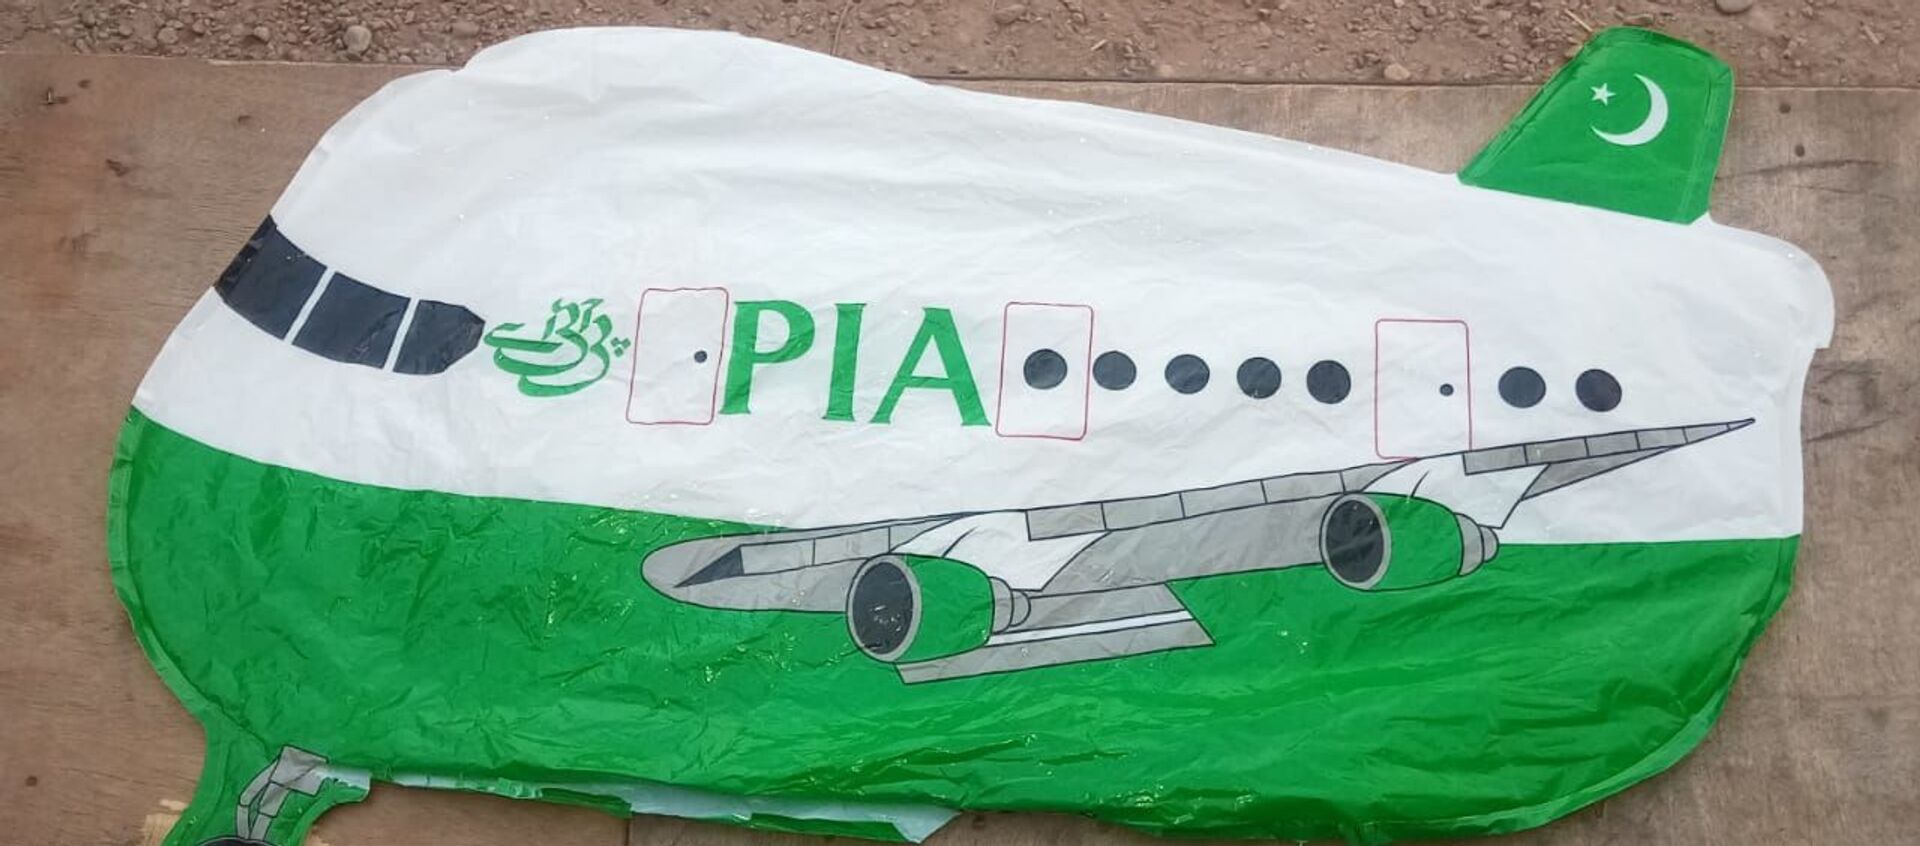 An aircraft-shaped balloon with 'PIA' written on it landed in Sotra Chak village of Hiranagar sector yesterday evening. The balloon was taken into custody by police: Jammu and Kashmir Police - Sputnik International, 1920, 10.03.2021